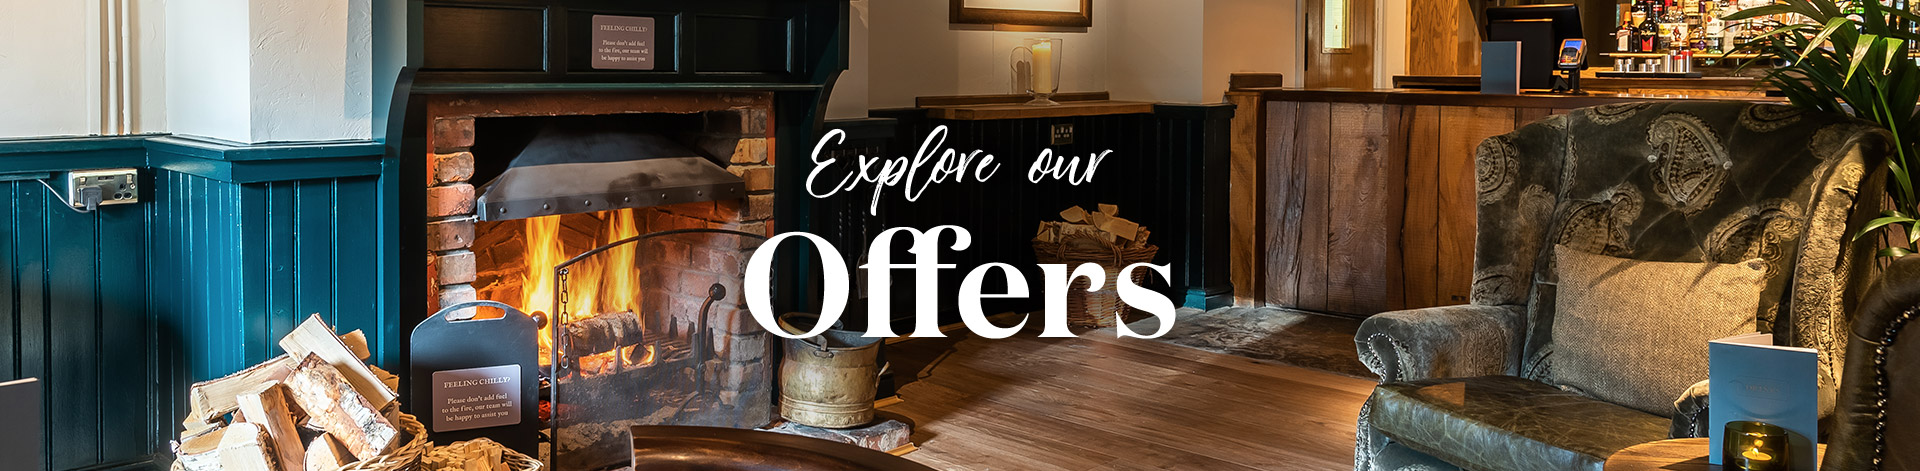 Our latest offers at The Chimneys